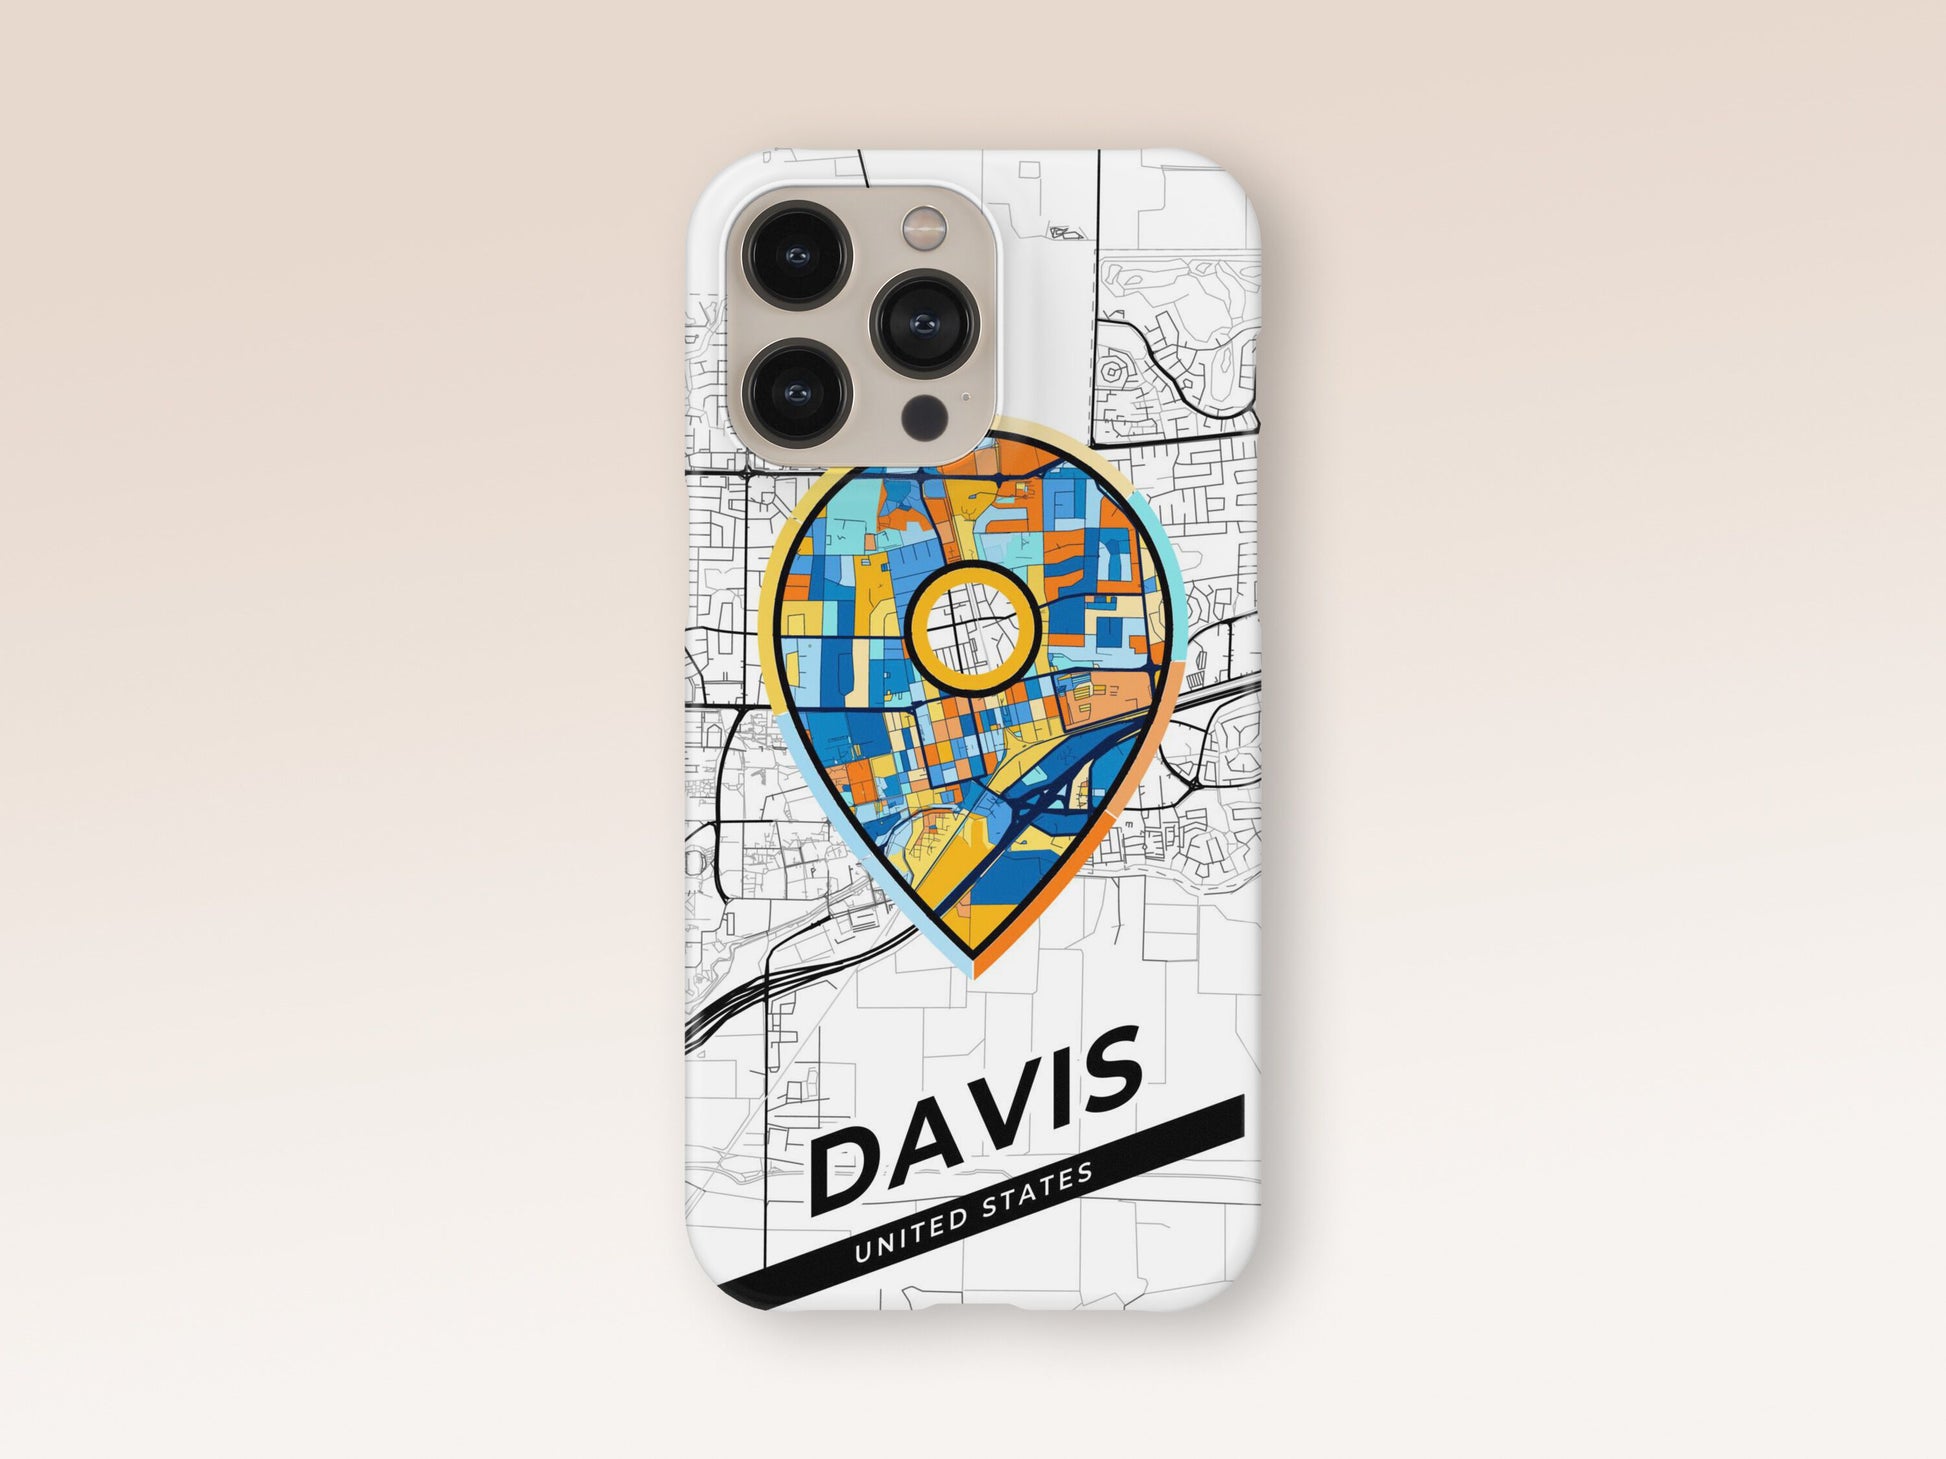 Davis California slim phone case with colorful icon. Birthday, wedding or housewarming gift. Couple match cases. 1